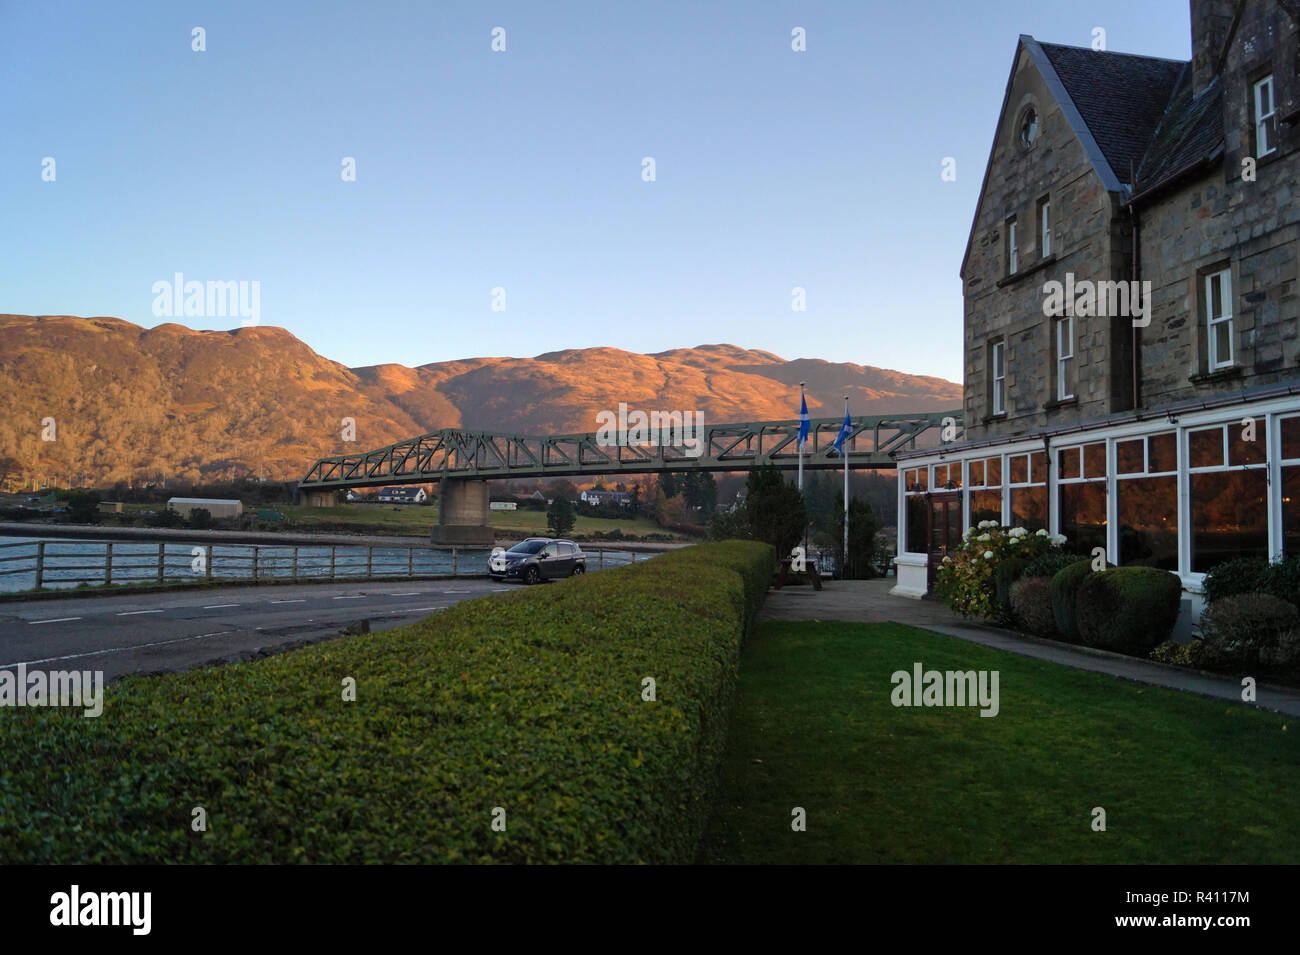 Ballachulish Hotel, Scenic Hotel Location in the Scottish Highlands.  Photo taken in Scotland Highlands during Autumn Stock Photo